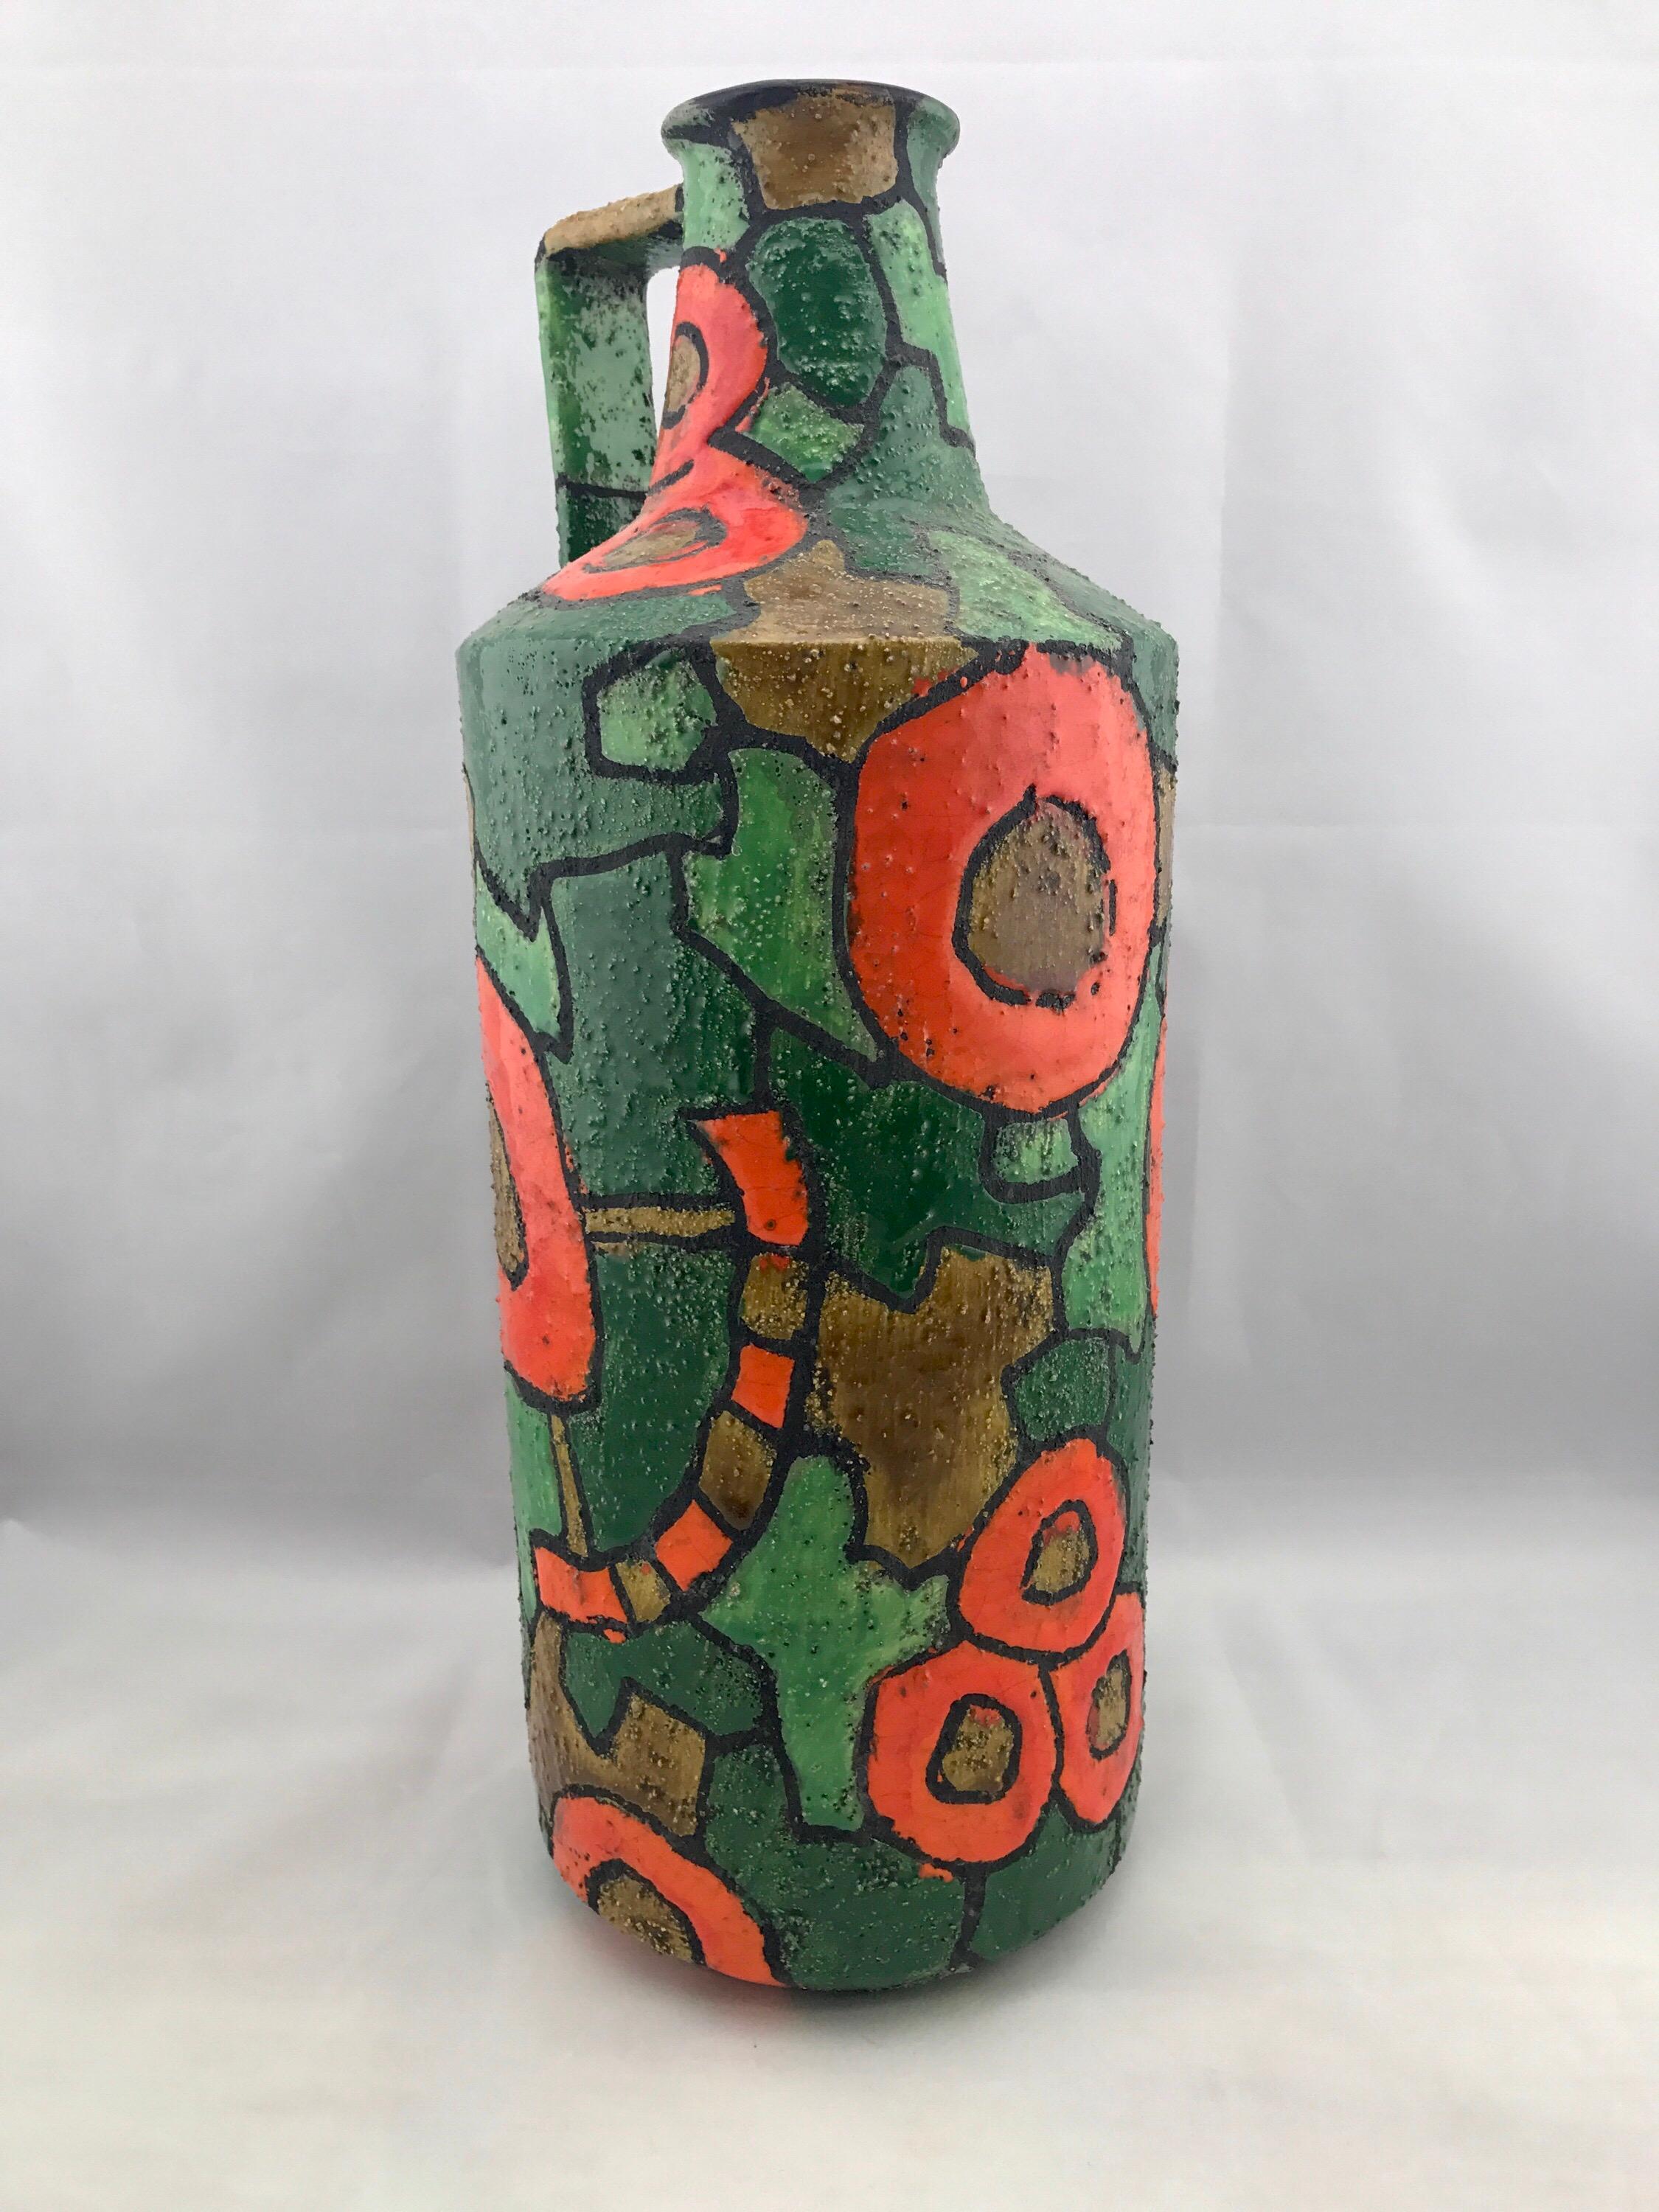 Monumental jug by Alvino Bagni for Raymor In The Tiffany Décor. This decor (pattern) is uncommon to the market and highly sought after. Very large and colorful. No known issues that would detract from value or aesthetics. Ready for use.